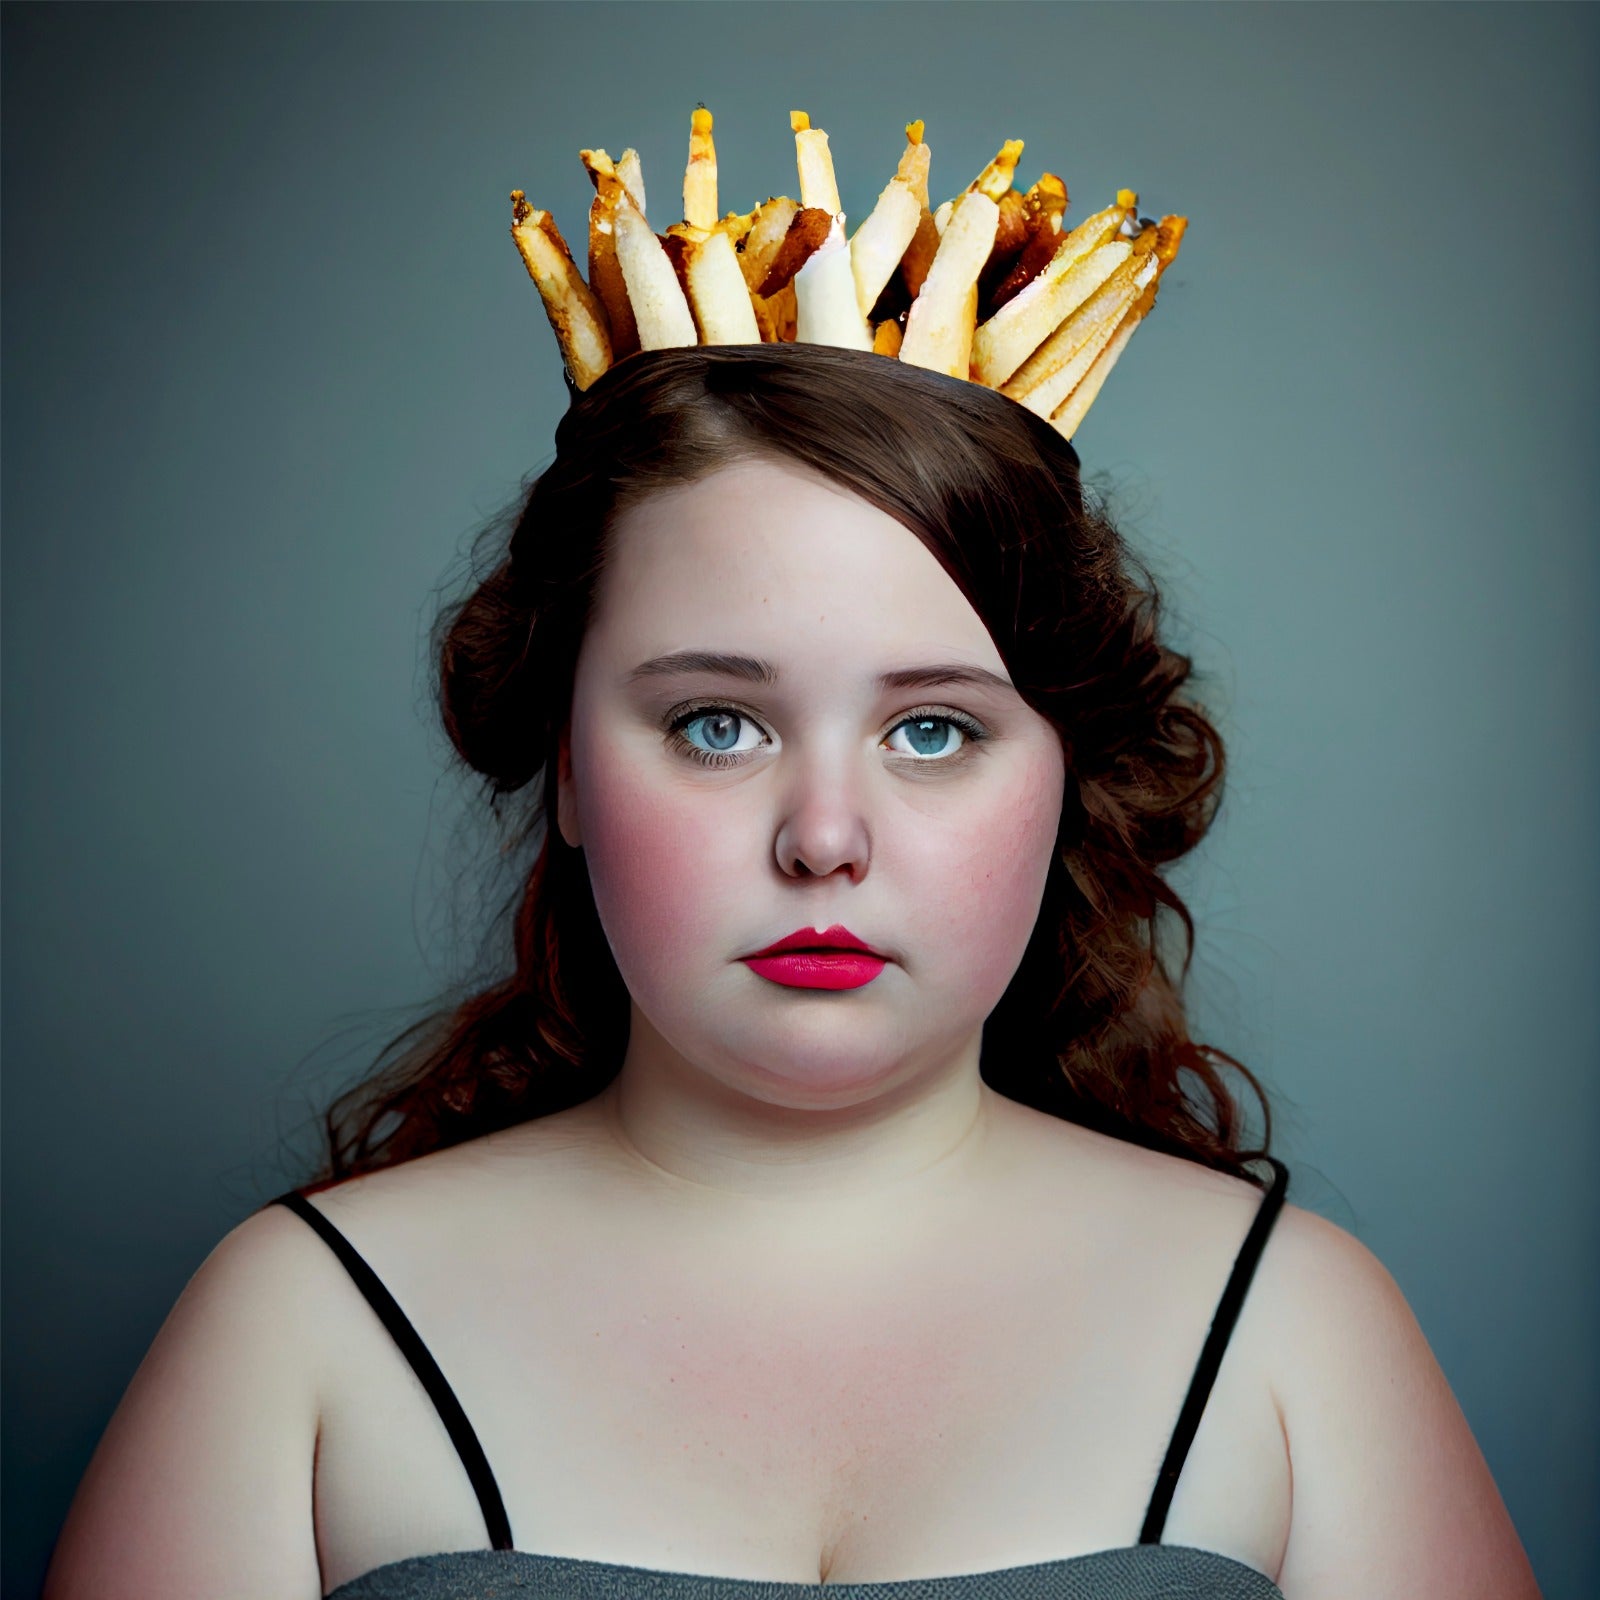 Painting 'The French Fries Queen'